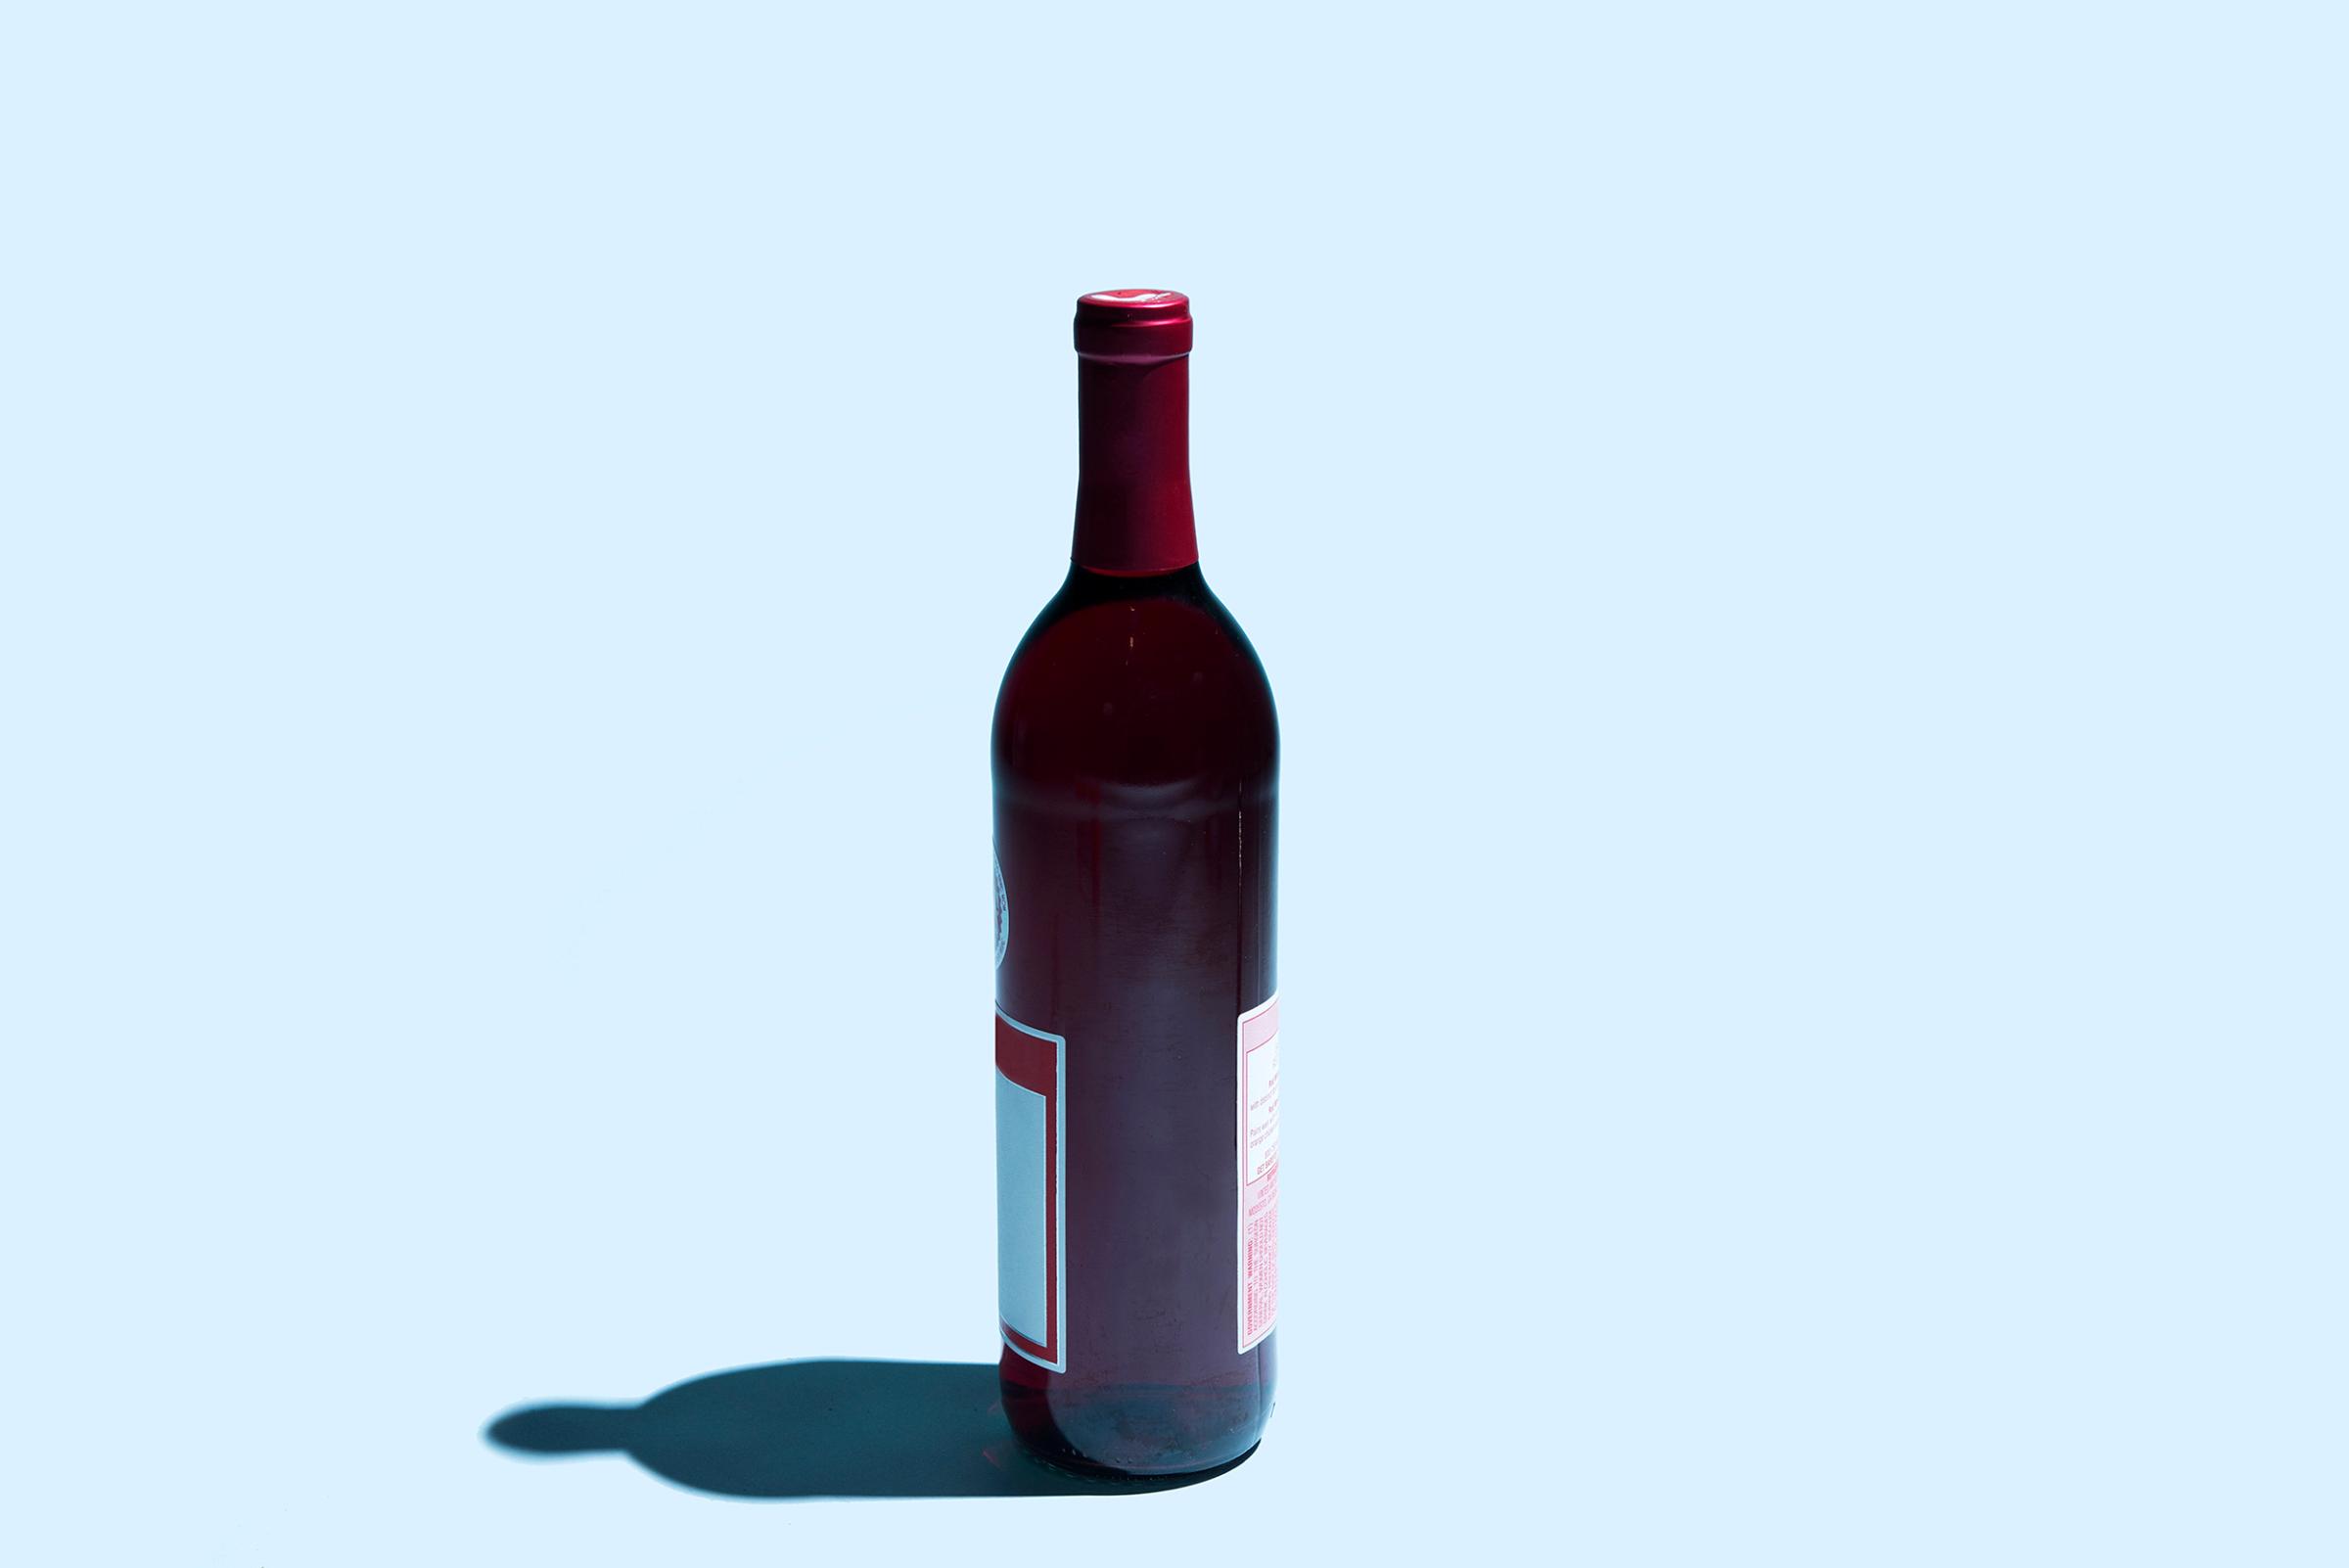 red-wine-bottle-2-drinking-health-alcohol-motto-stock